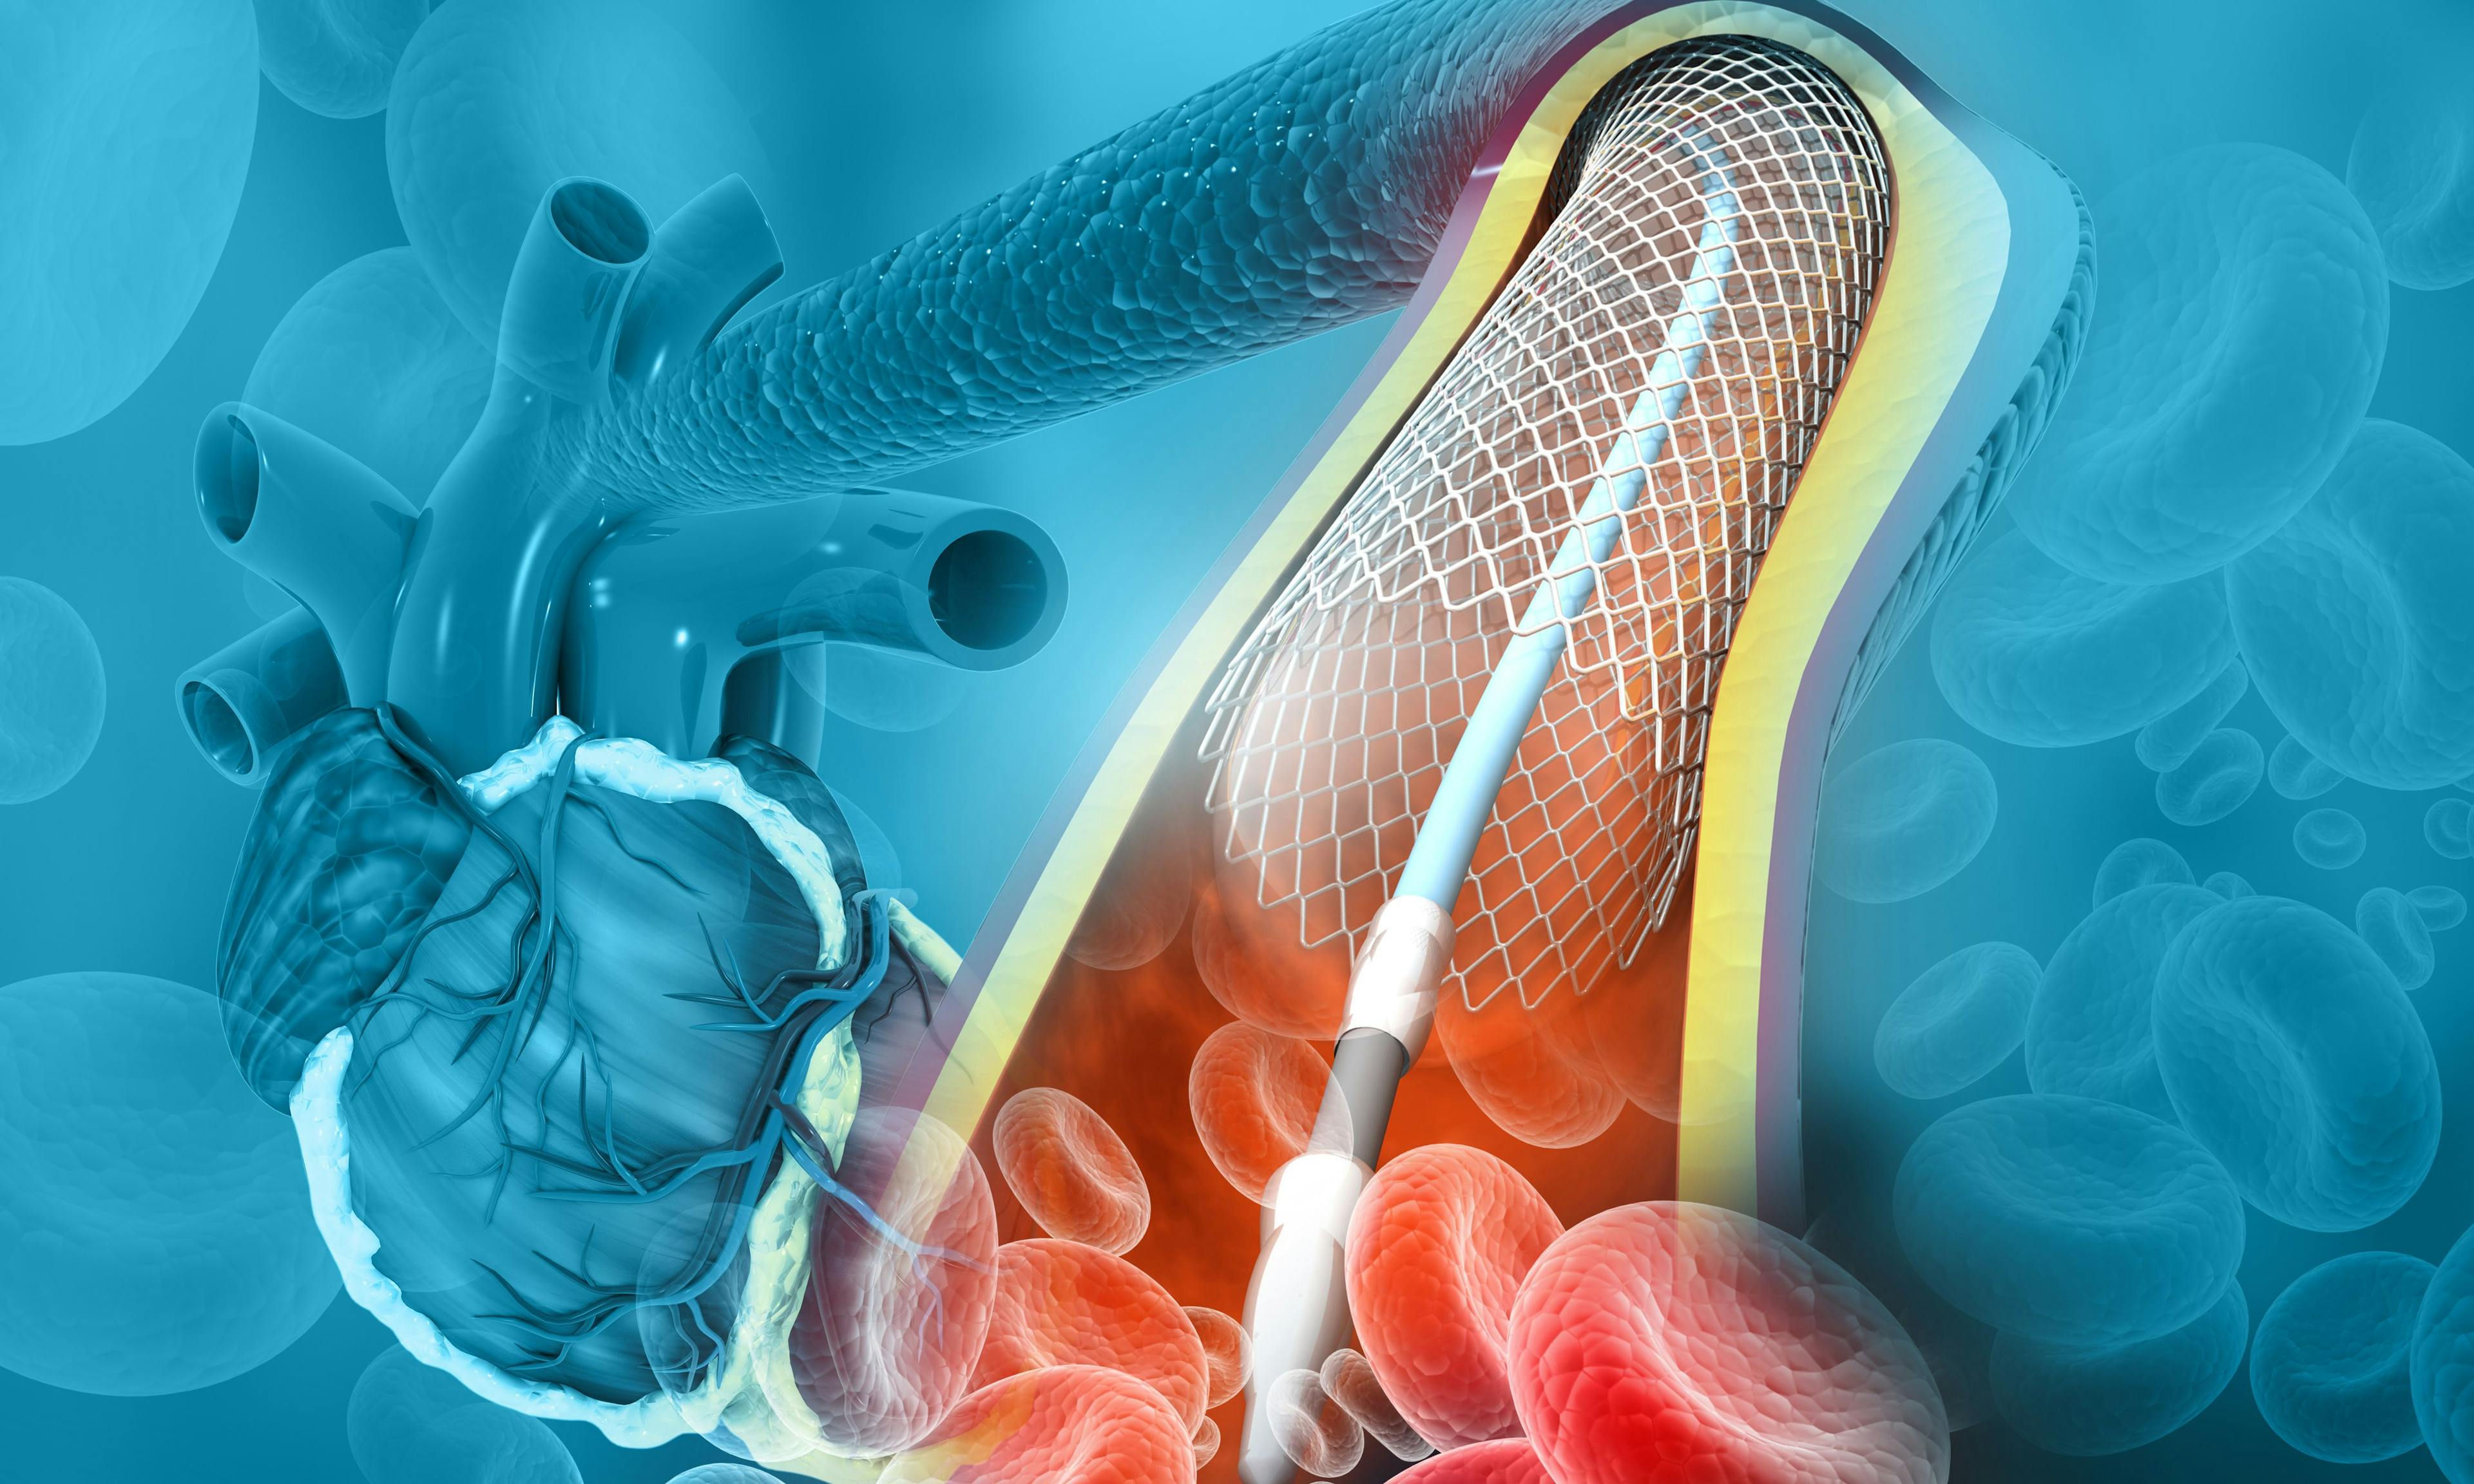 Angioplasty For Stable Angina On Par With Antianginal Medications, Say ORBITA-2 Investigators | AHA Scientific Sessions